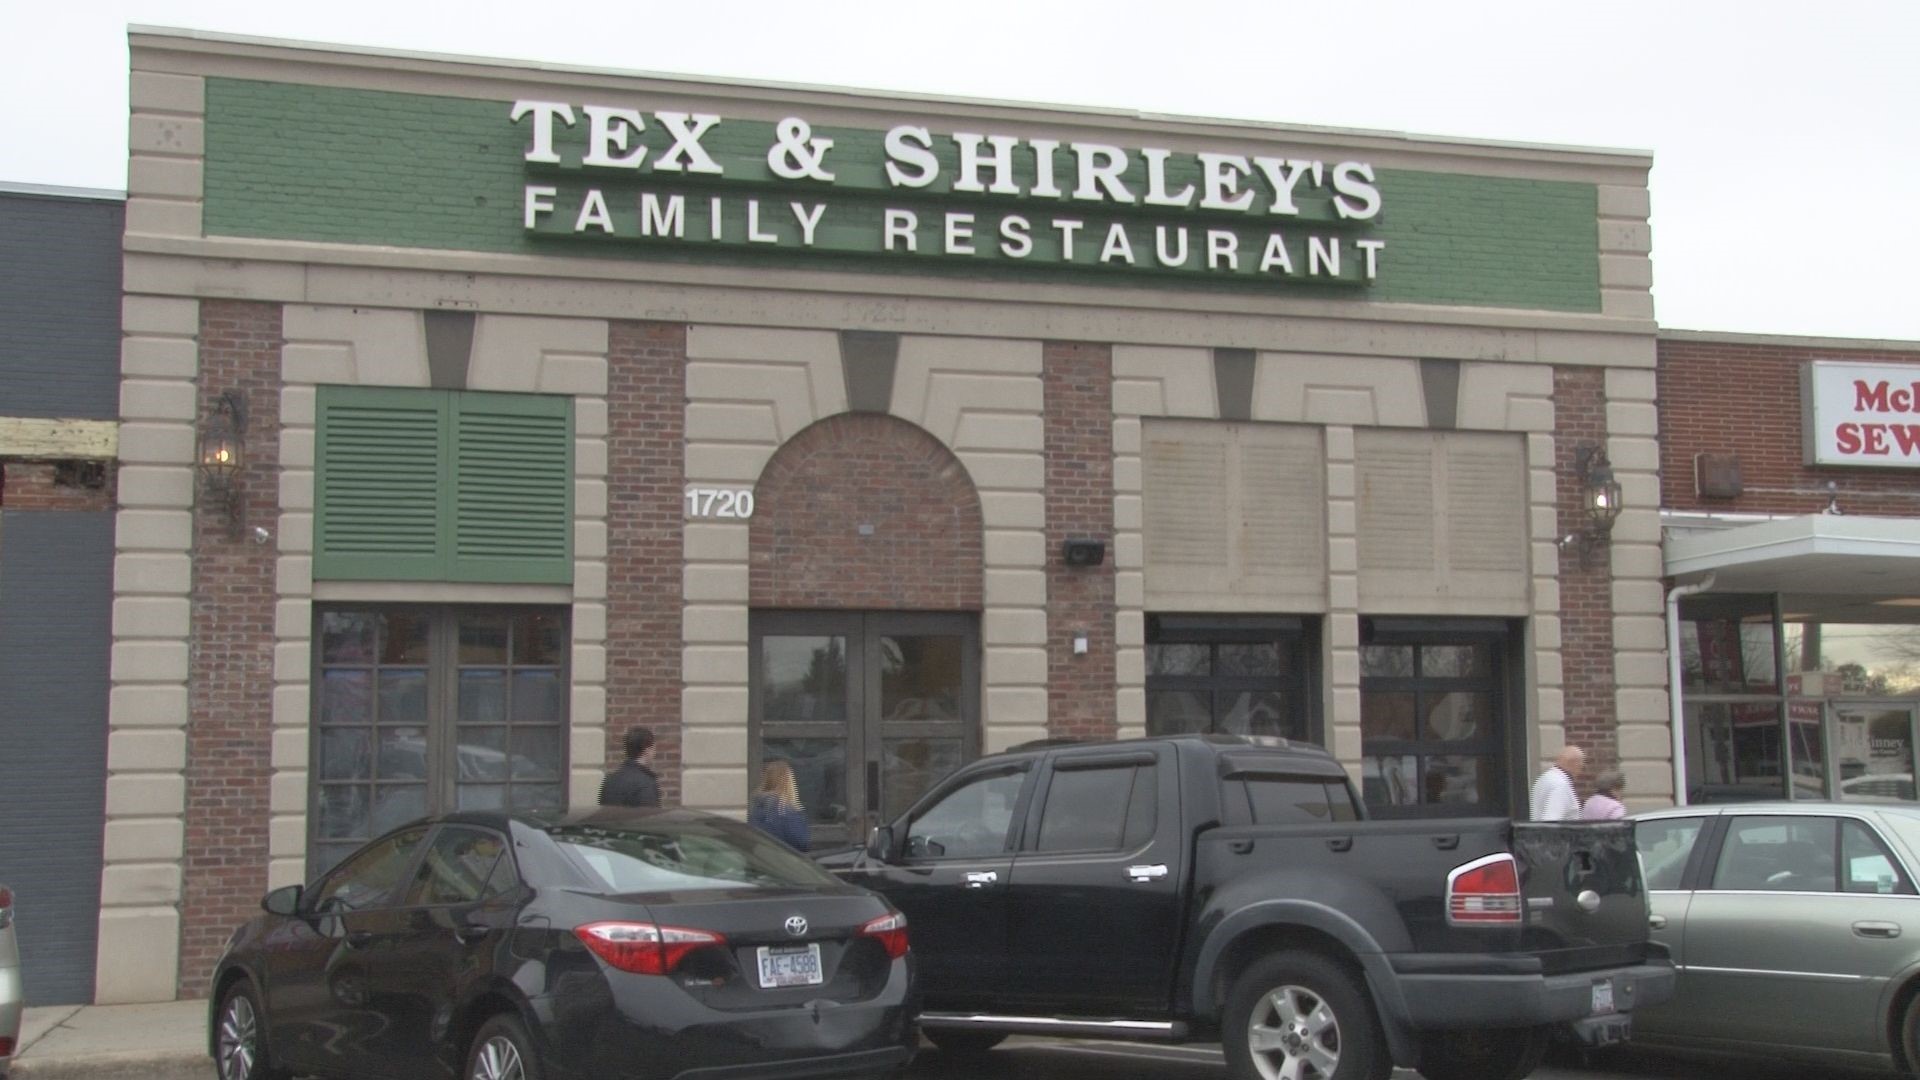 After a year of renovation, the Tex & Shirley's family restaurant is back in Greensboro, this time in a new location.